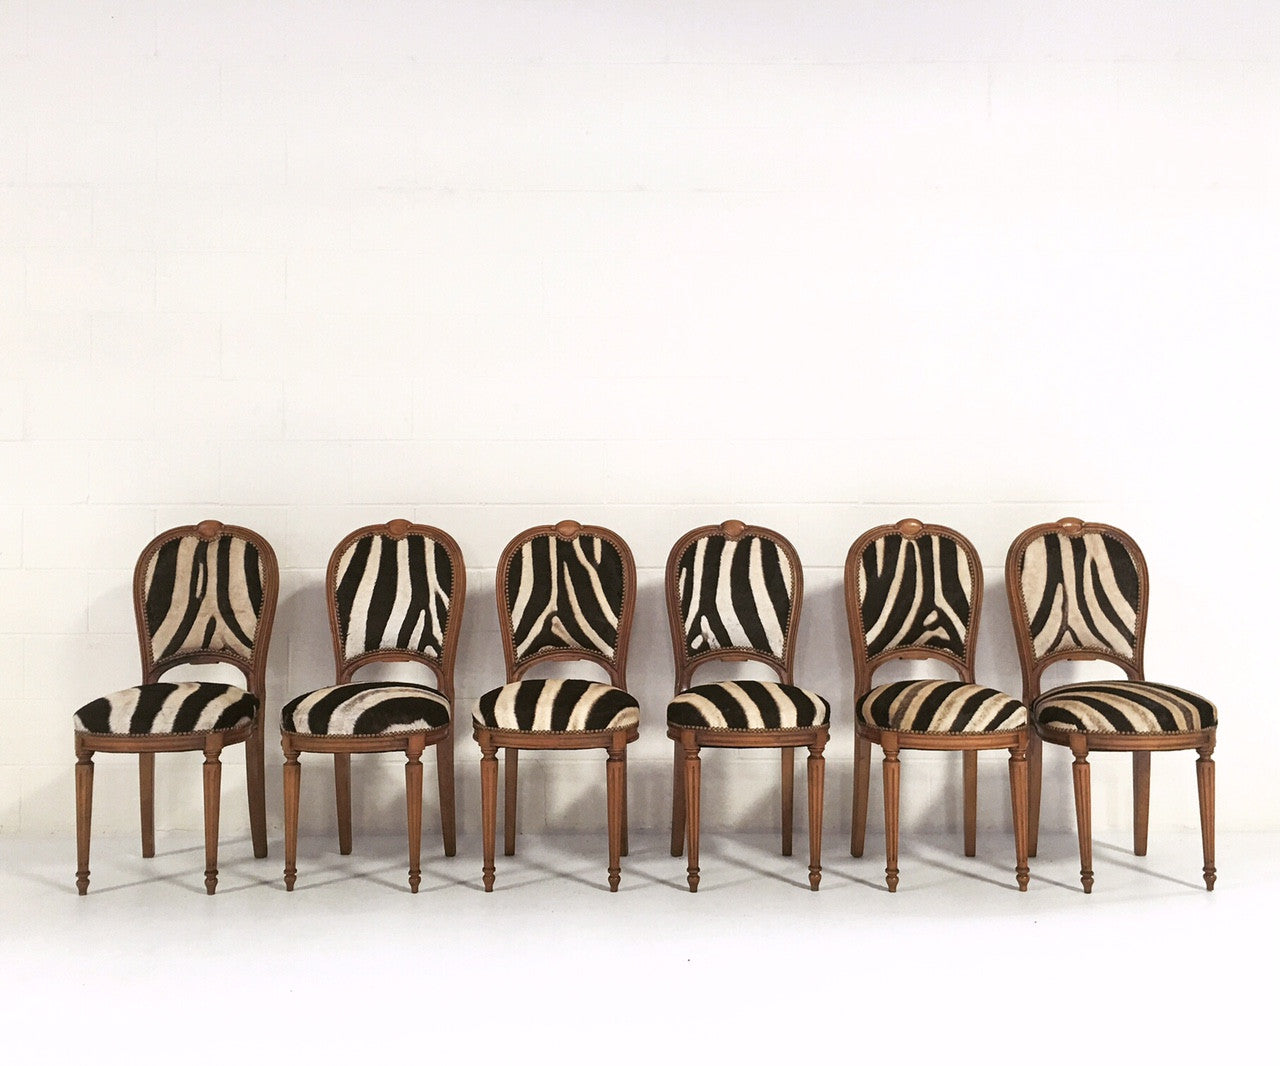 Louis XVI Style Dining Chairs in Zebra Hide, set of 6 - FORSYTH